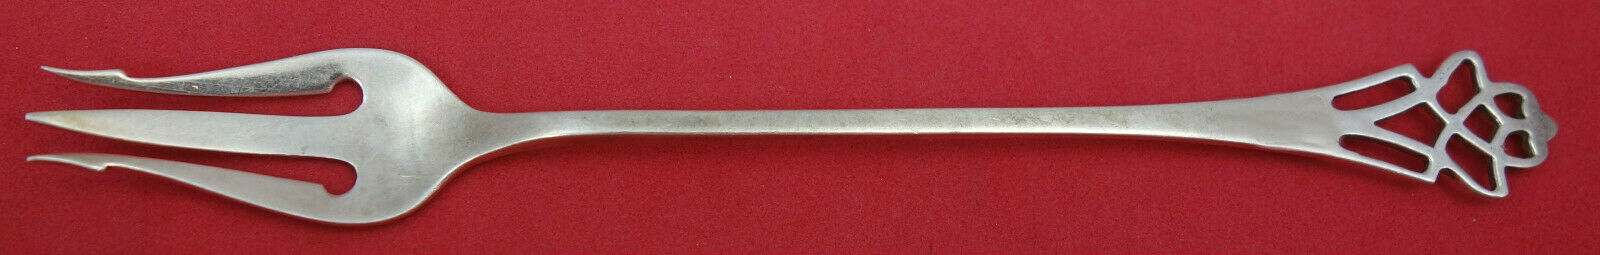 Primary image for Pynchon by Lunt Sterling Silver Pickle Fork 3-tine 5 5/8"